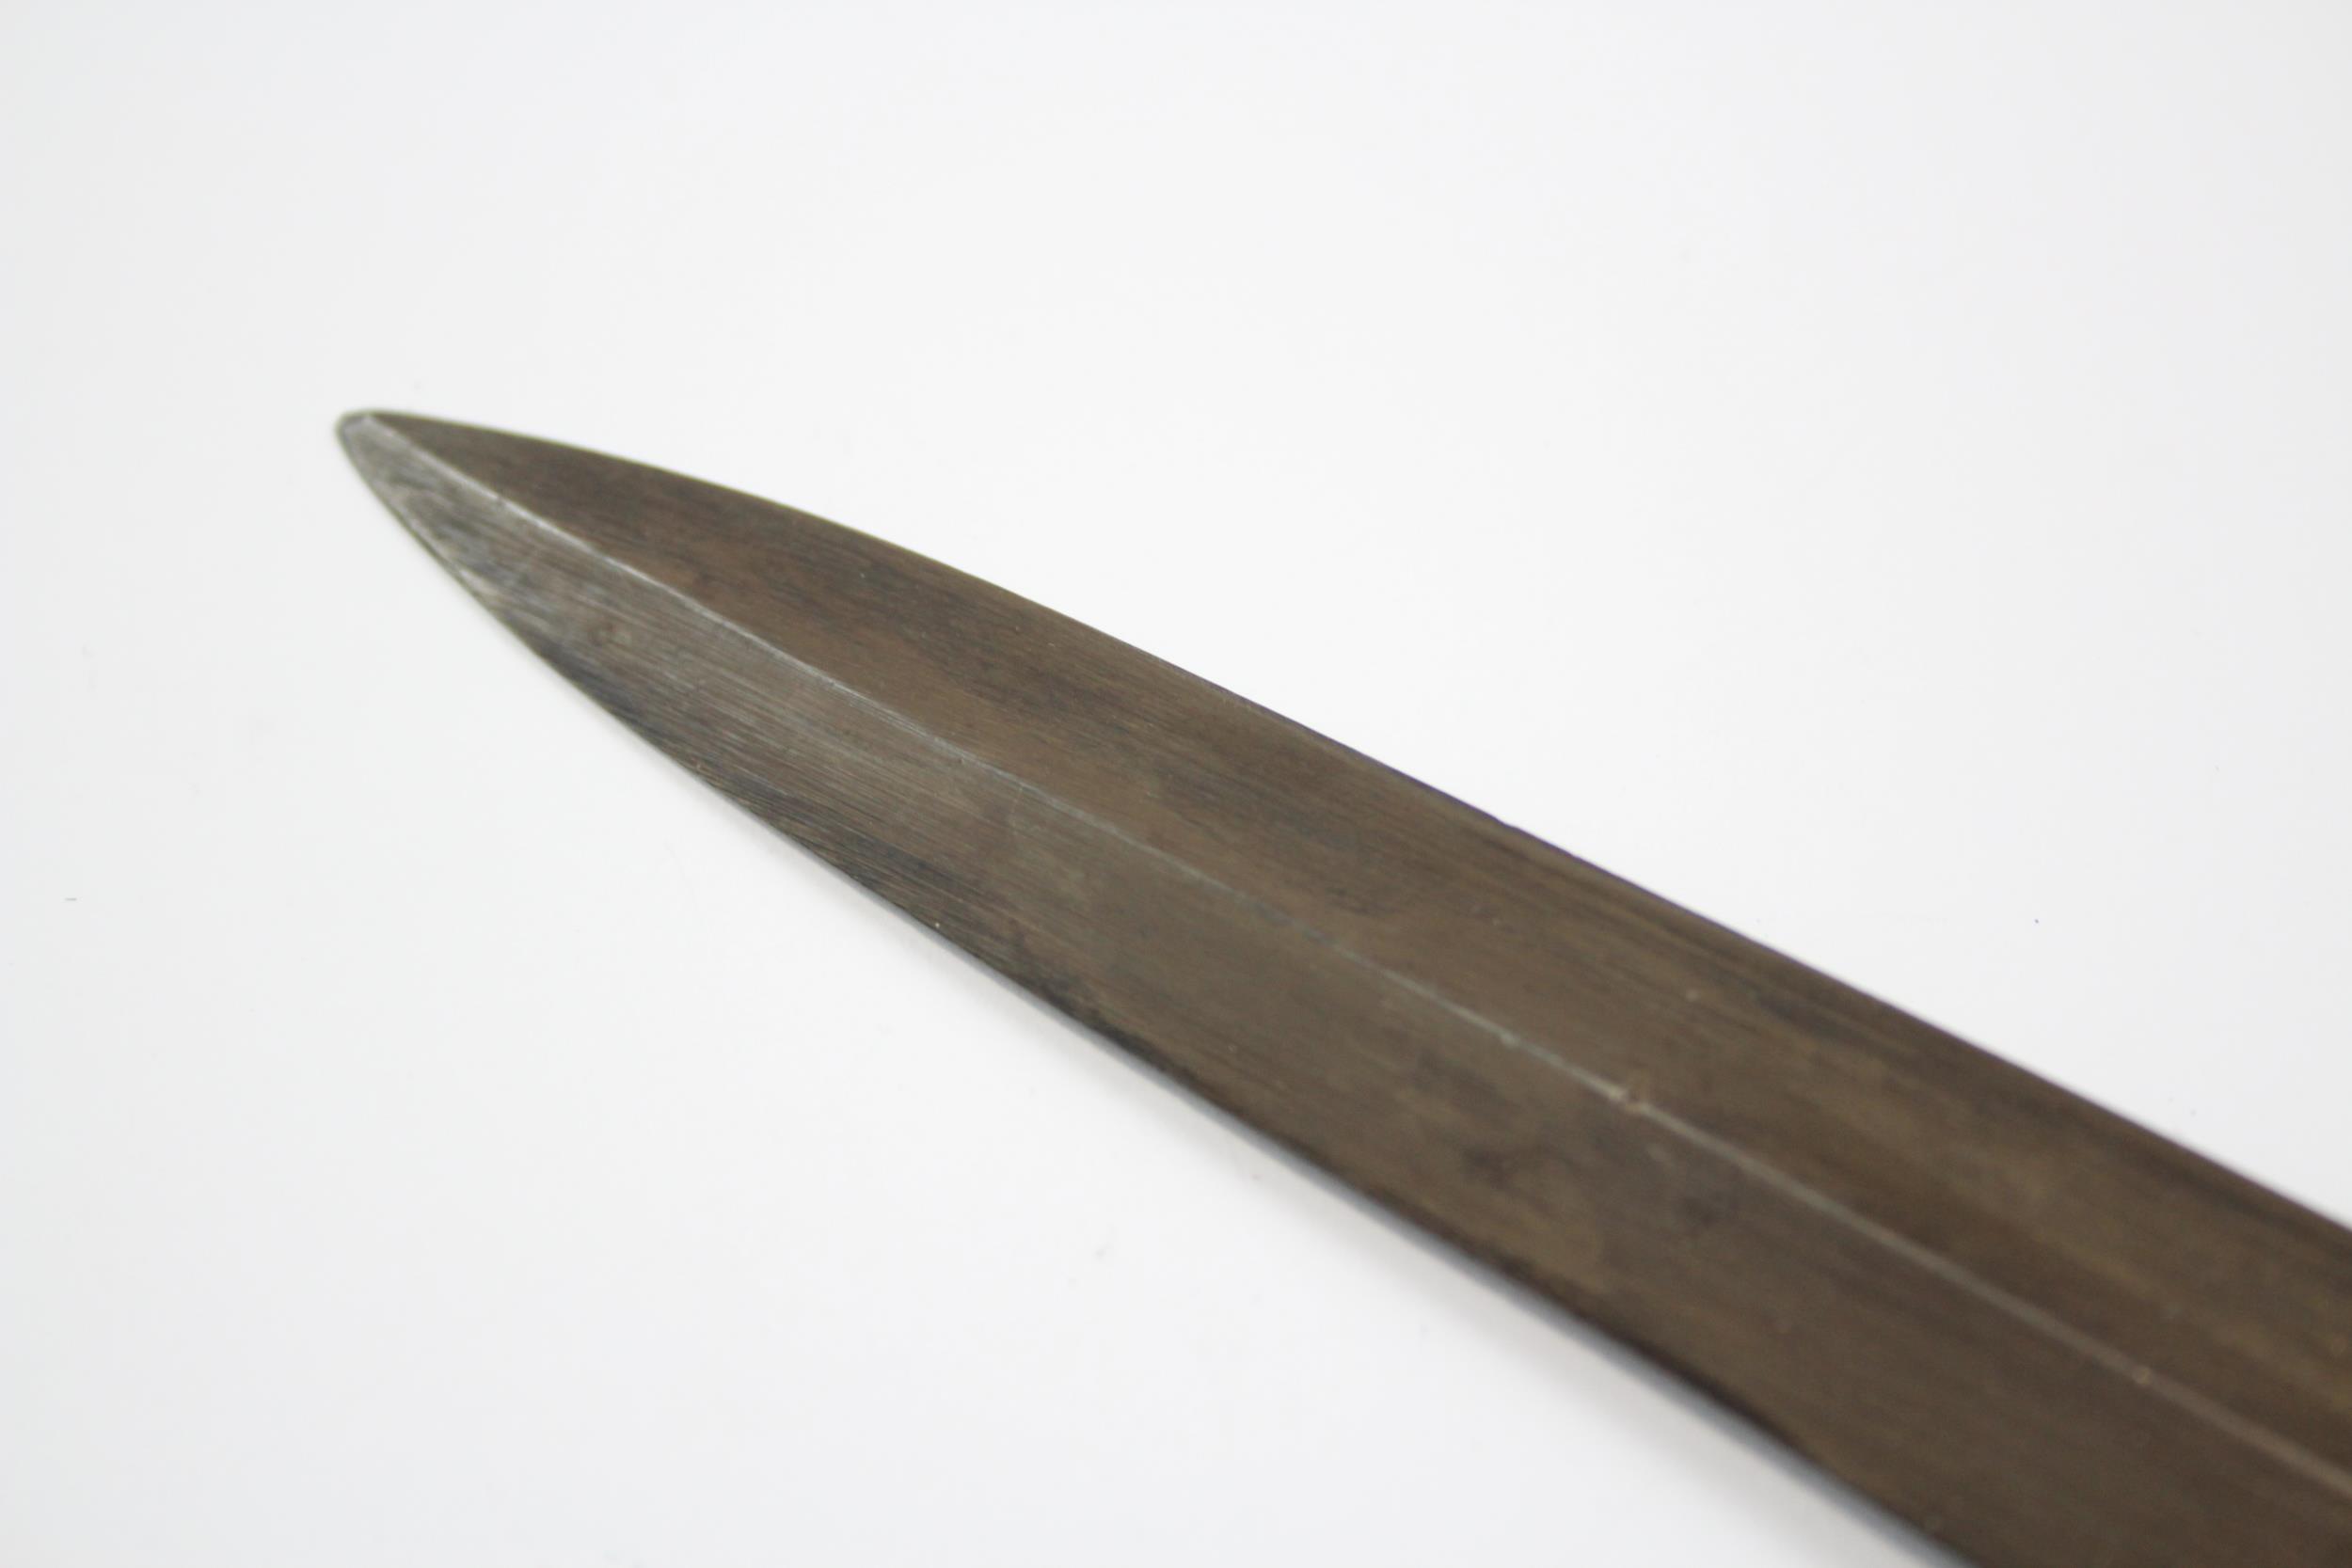 3rd Pattern Commando Dagger Marked William Rodgers Made In Sheffield England // 3rd Pattern Commando - Image 2 of 4